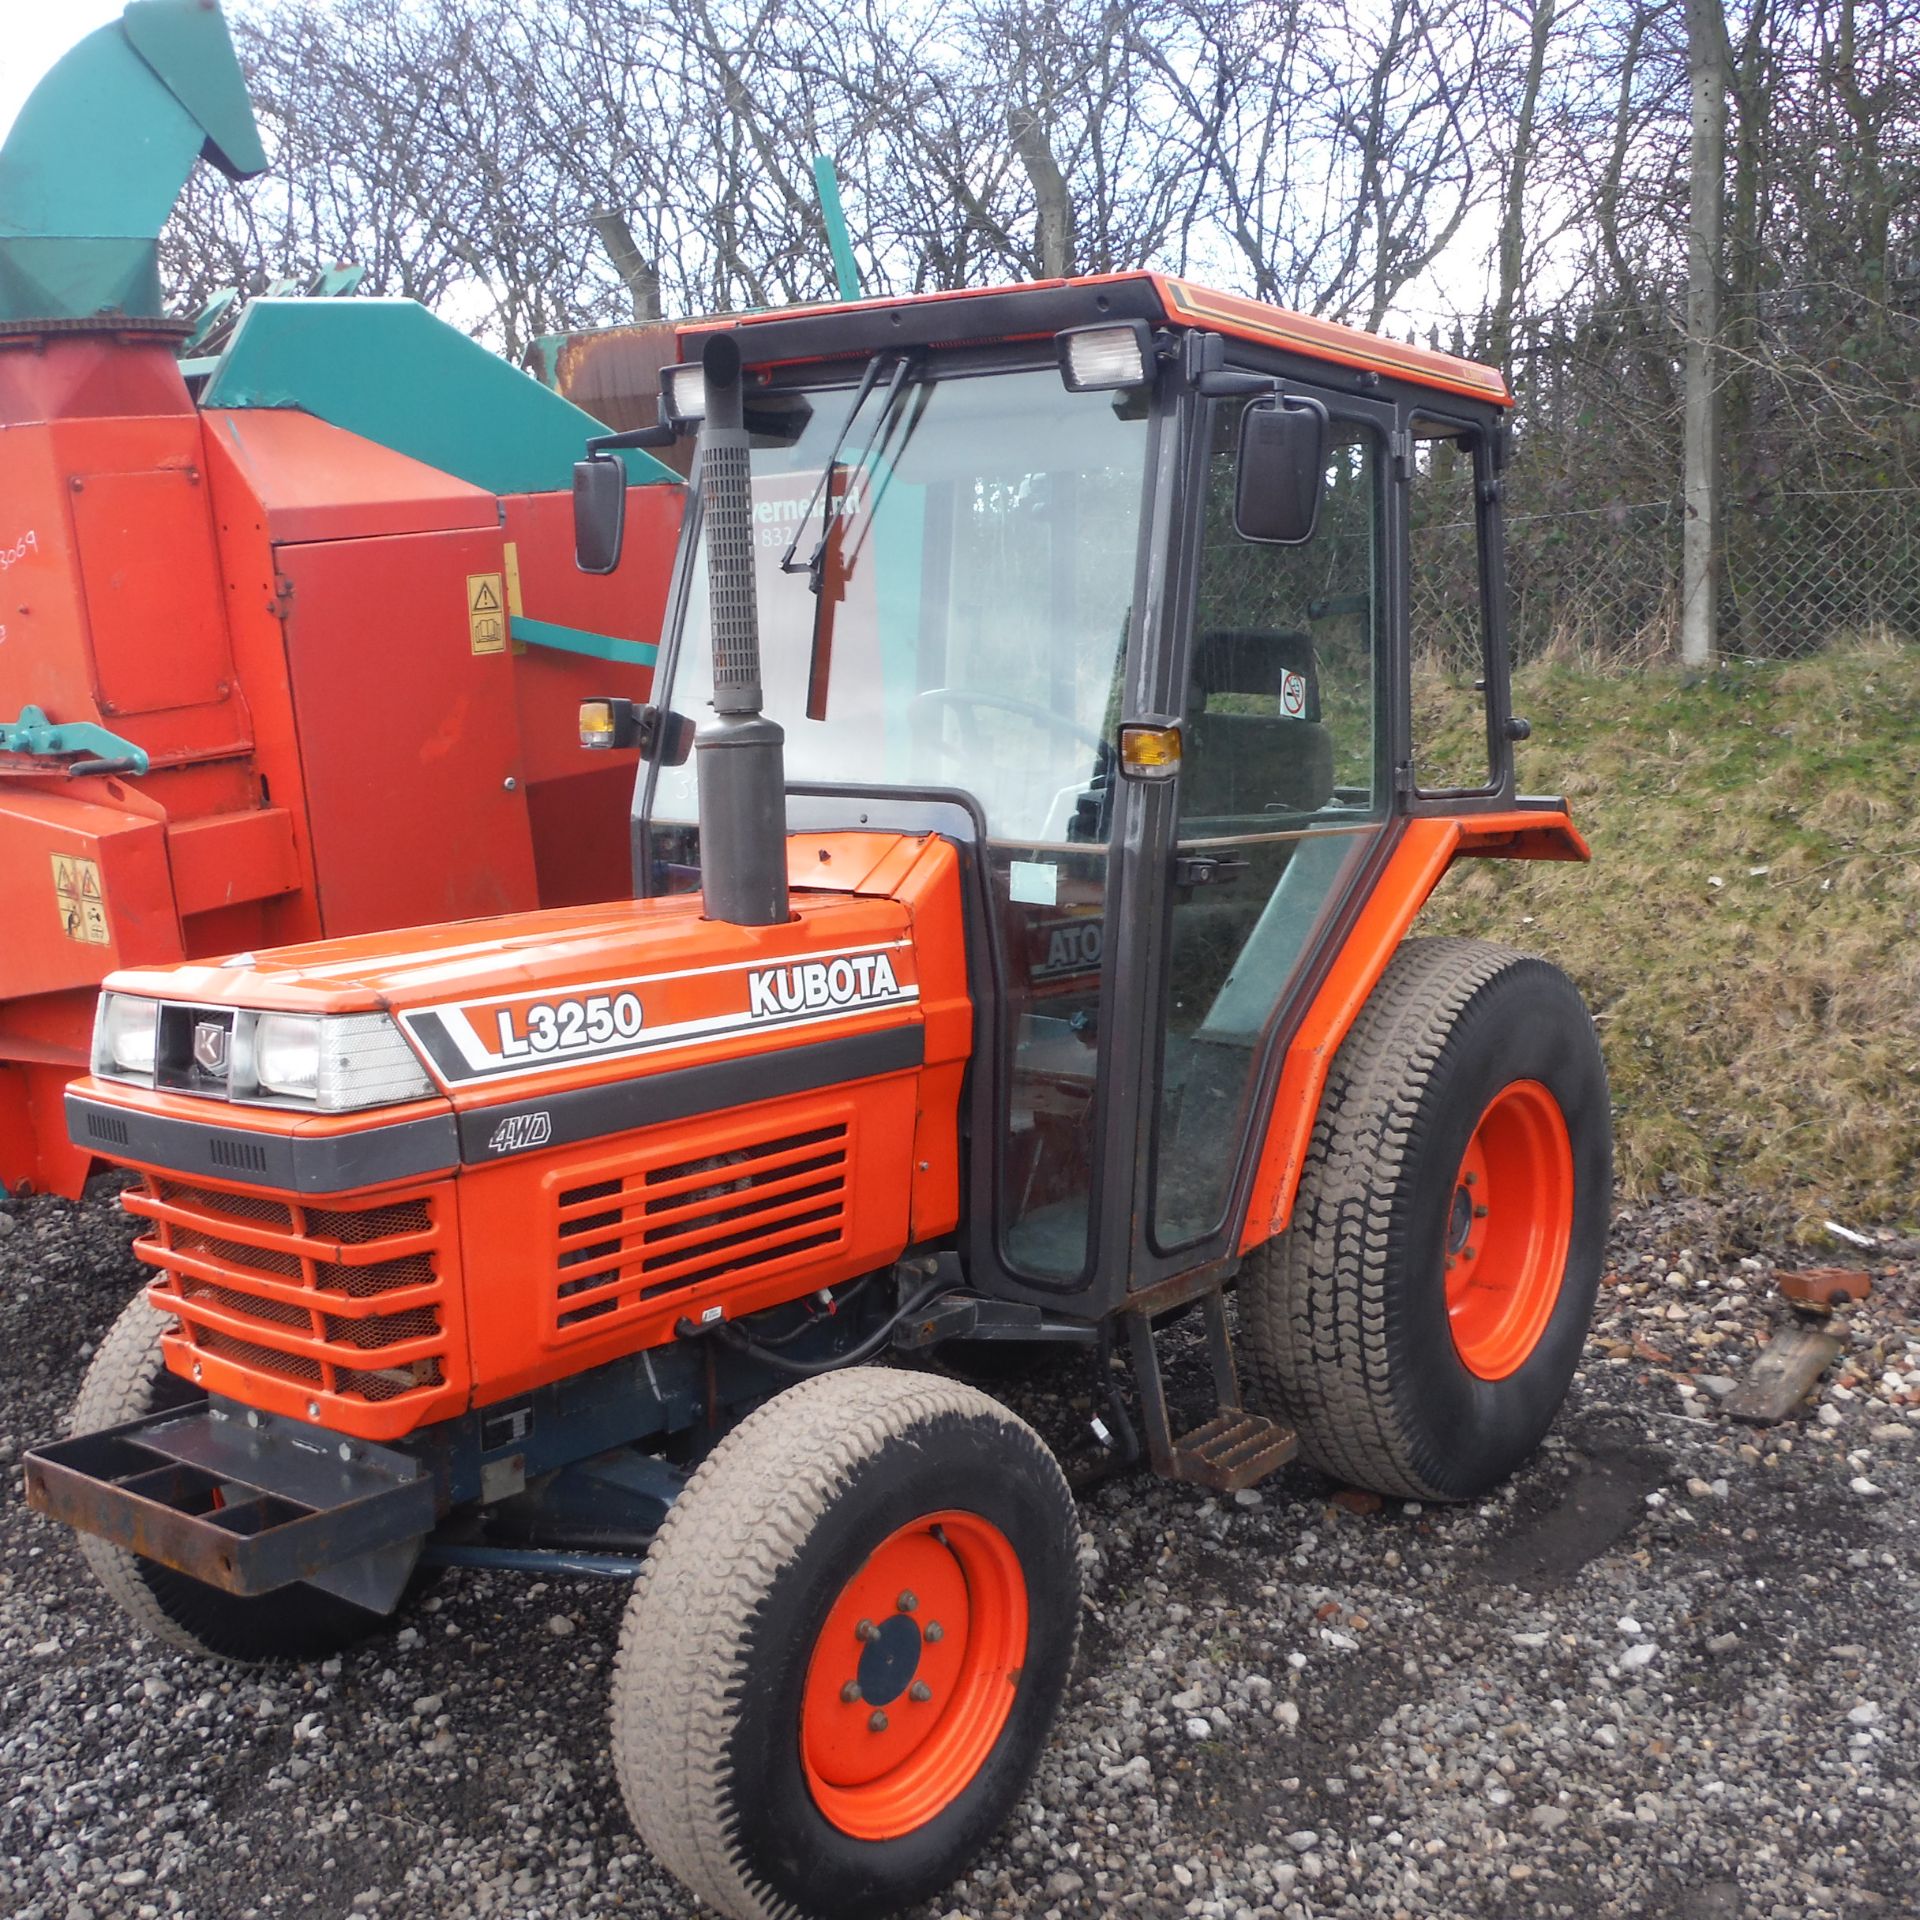 KUBOTA L3250 4wd cabbed compact tractor c/w turf tyres (s/n 52235)(3041 rec hrs) (R&D) - Image 2 of 2